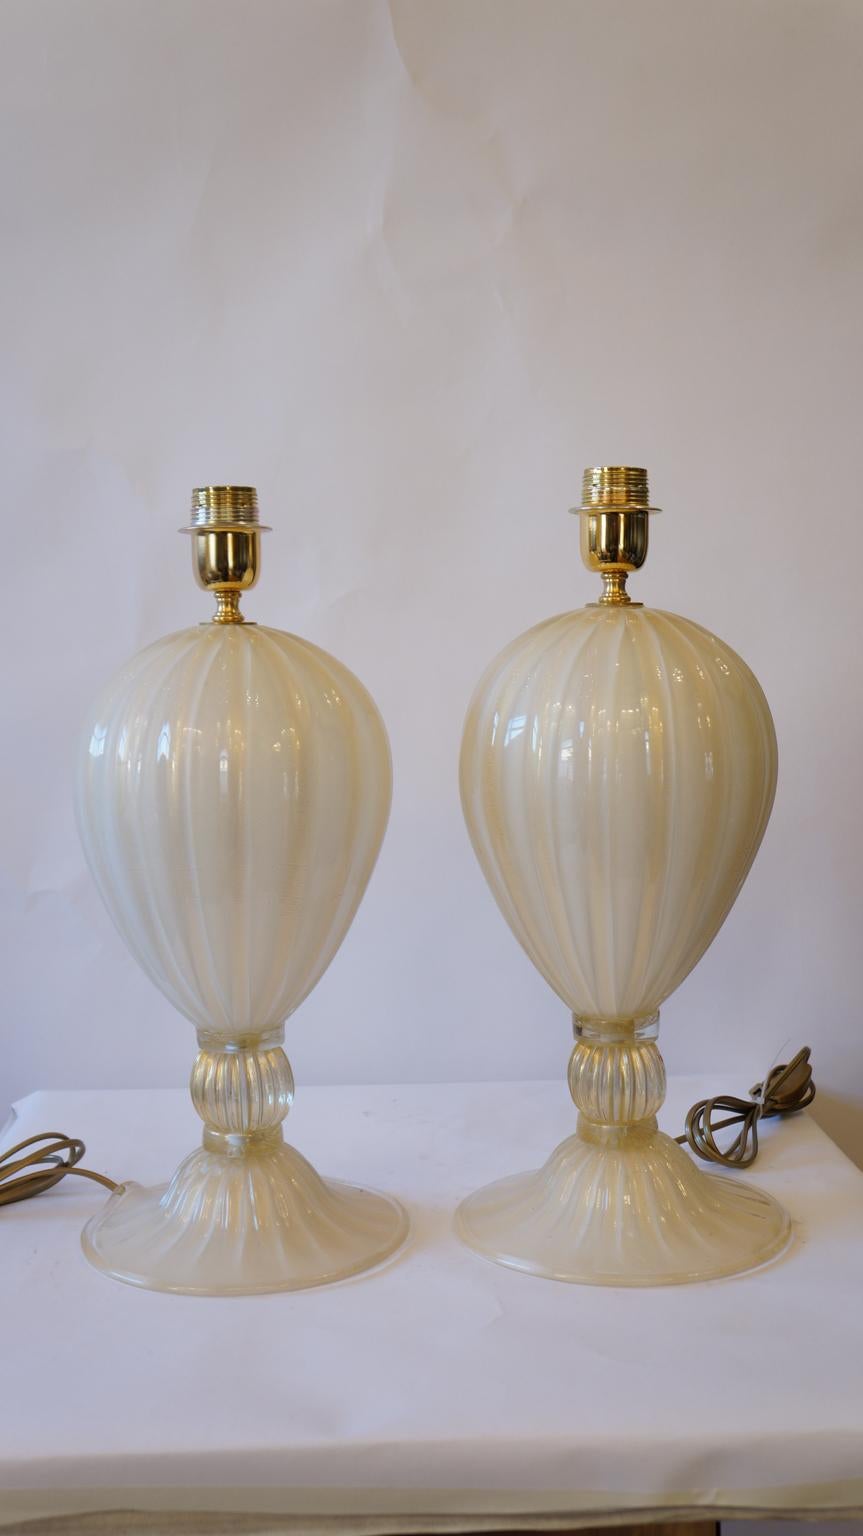 Exclusive pair of Murano glass table lamps white colour with details in 24 carat gold leaf.
By touching the lamps, you can hear the various grooves made especially by the 